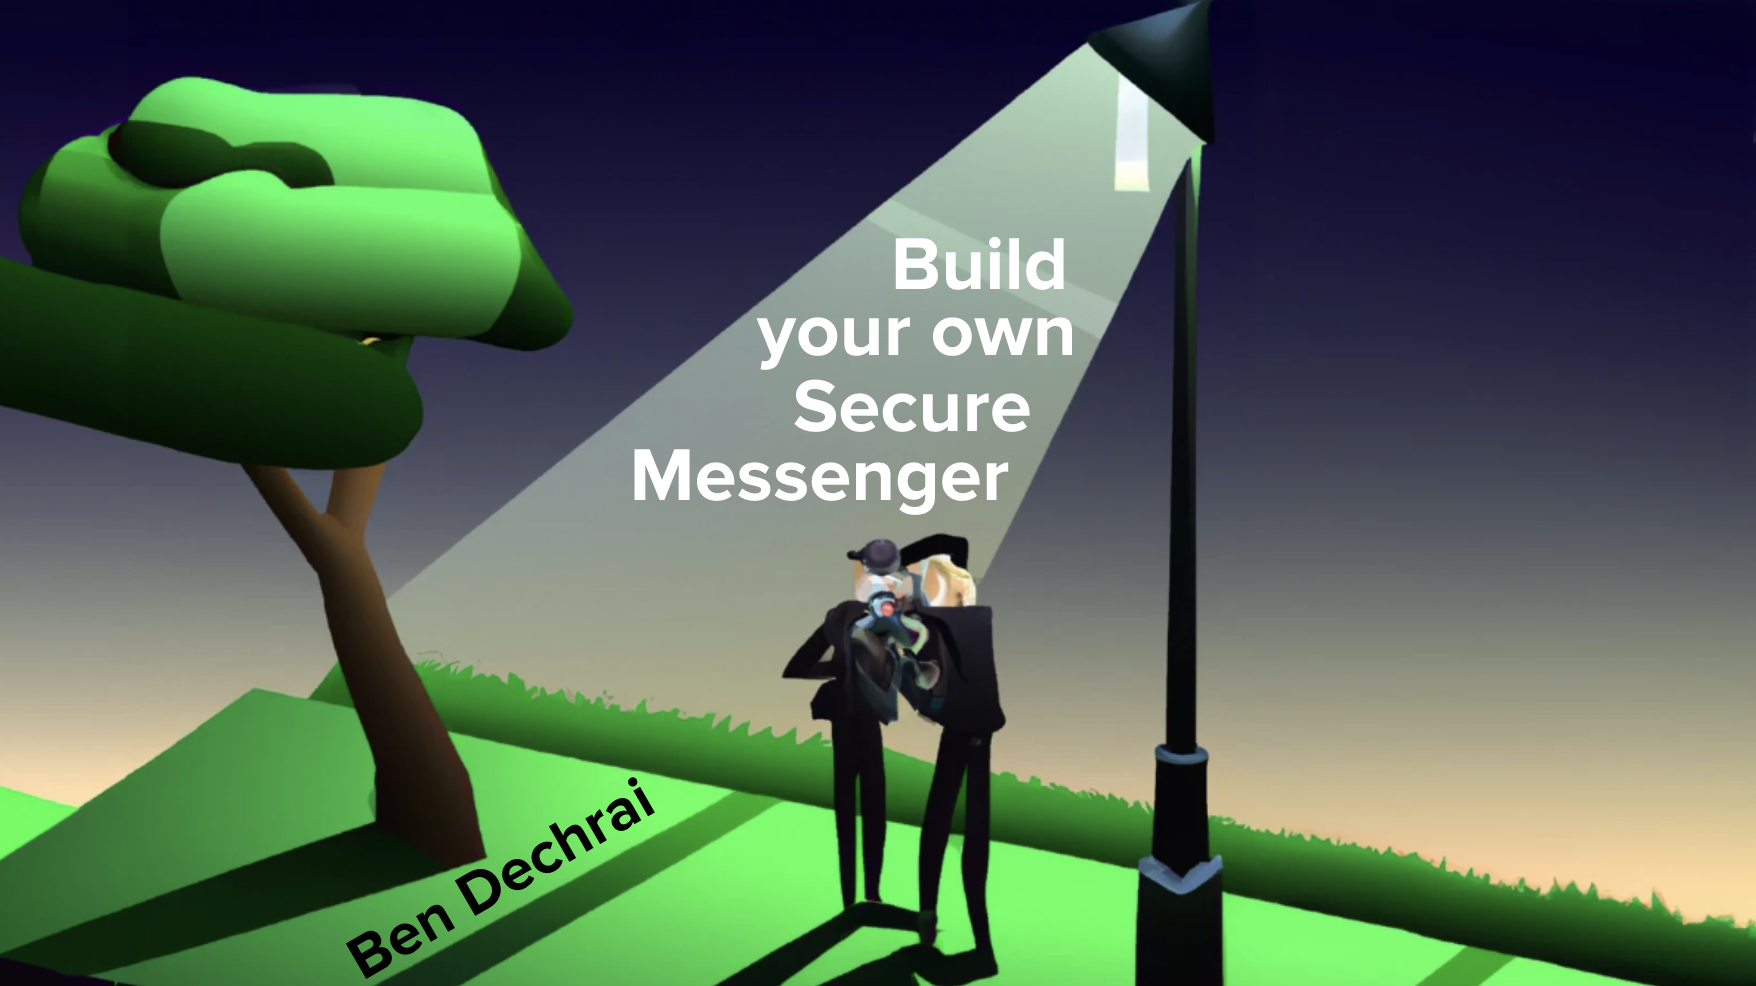 Cover Image for the Build Your Own Secure Messenger project